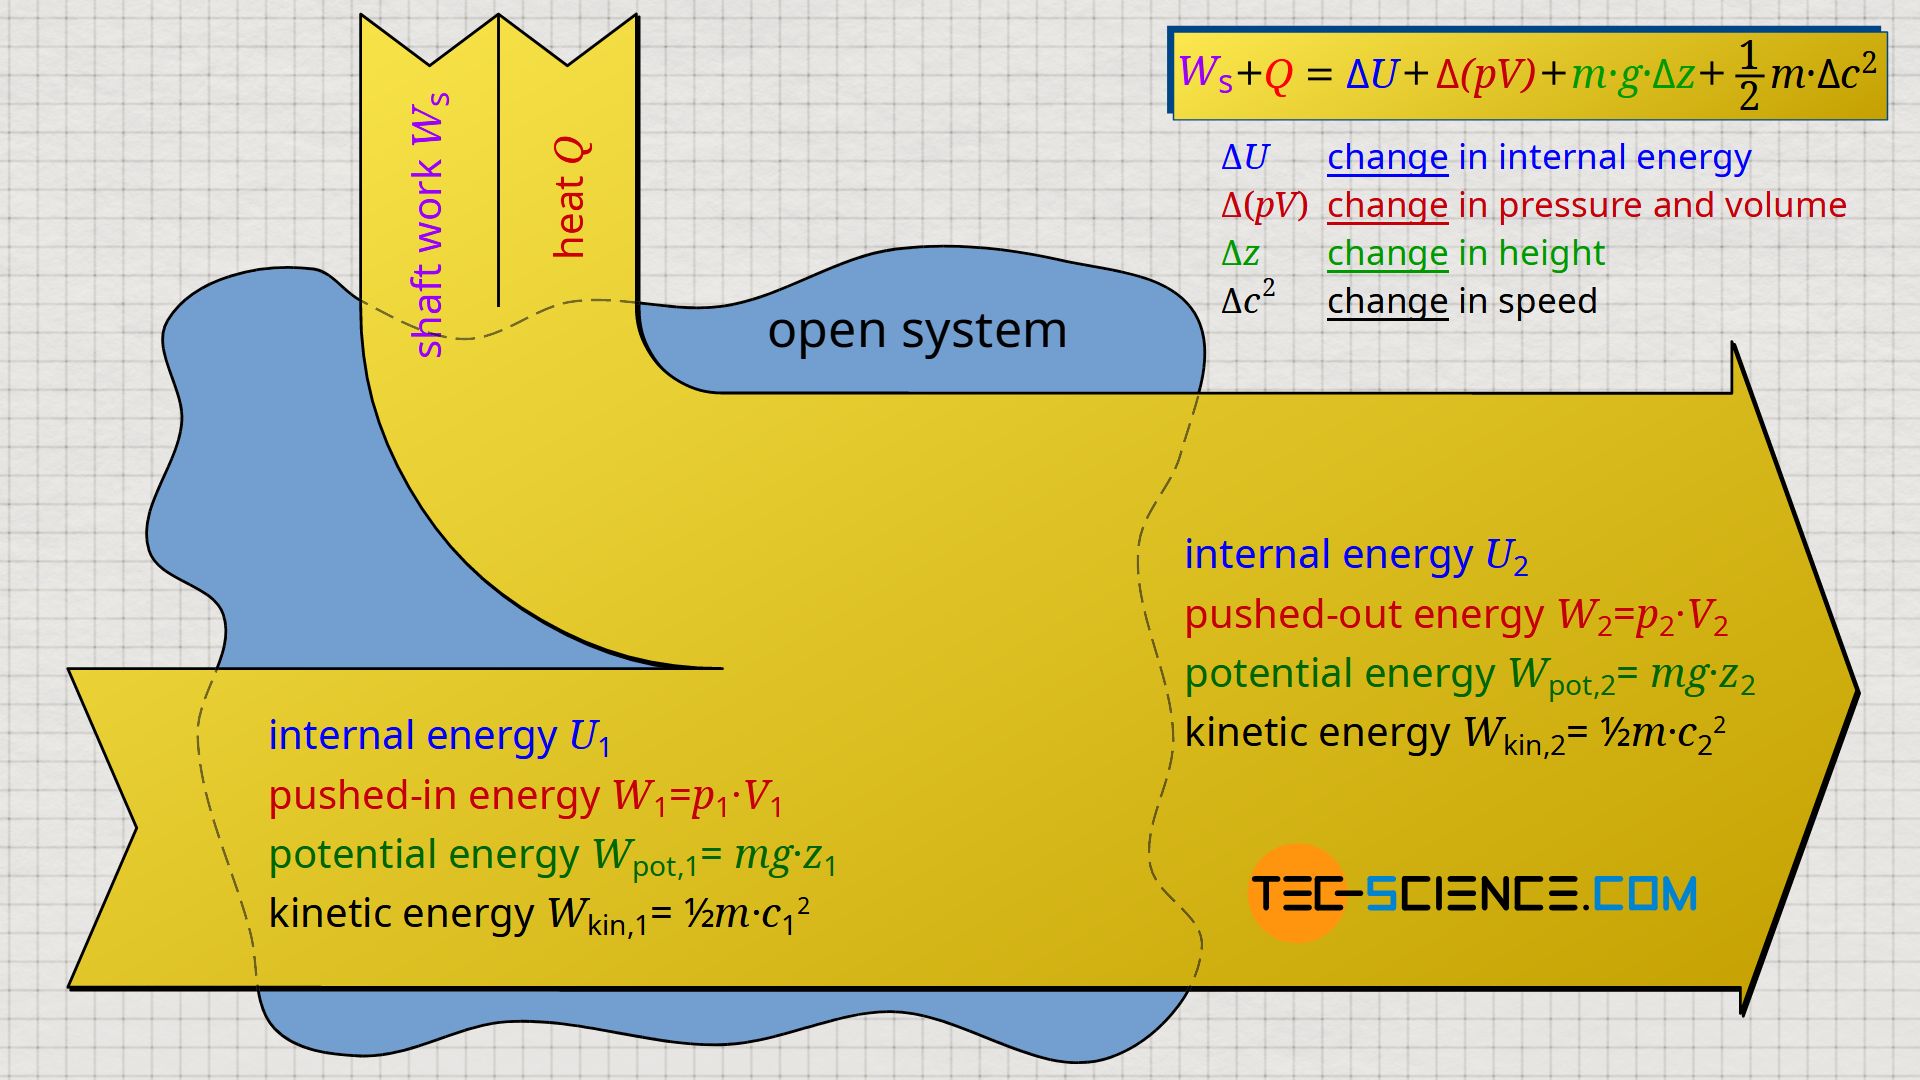 First law of thermodynamics for a fluid element moving through an open system